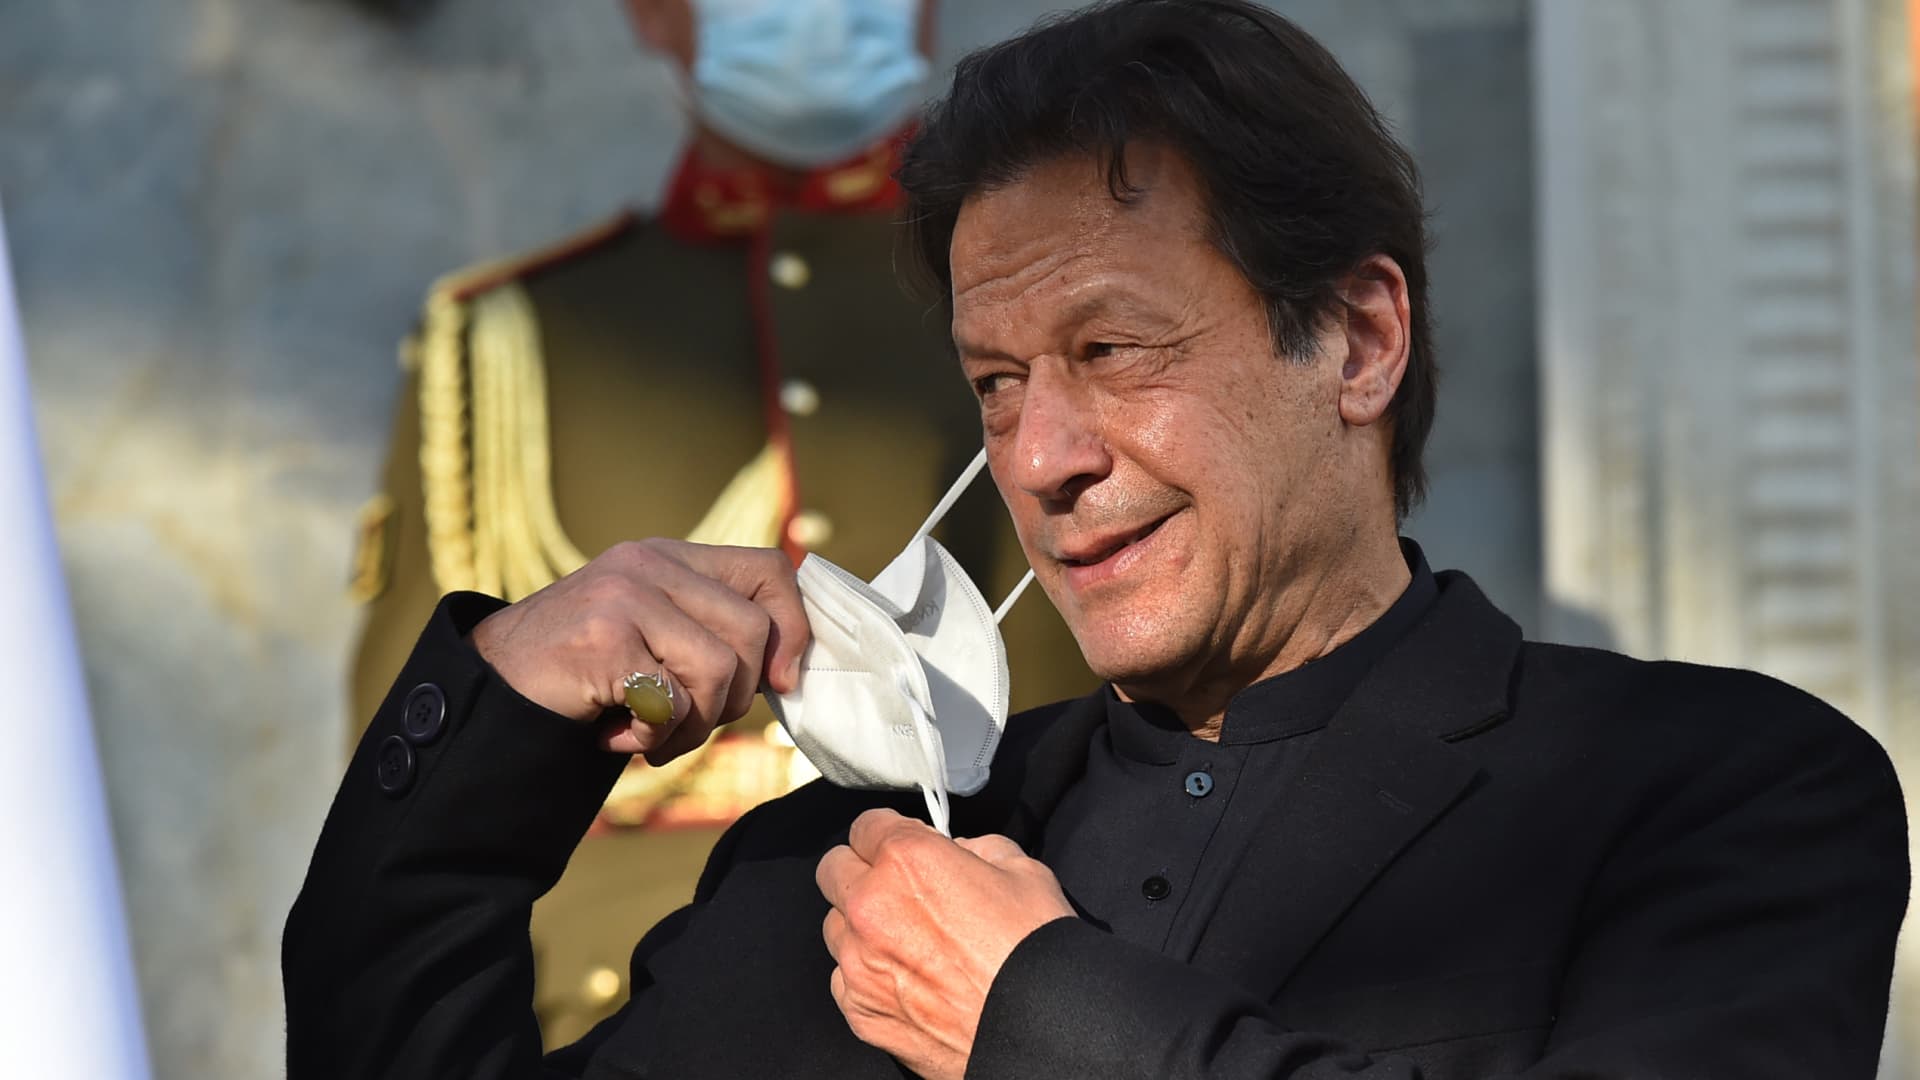 Imran Khan’s surprise call for snap elections in Pakistan may just pay off